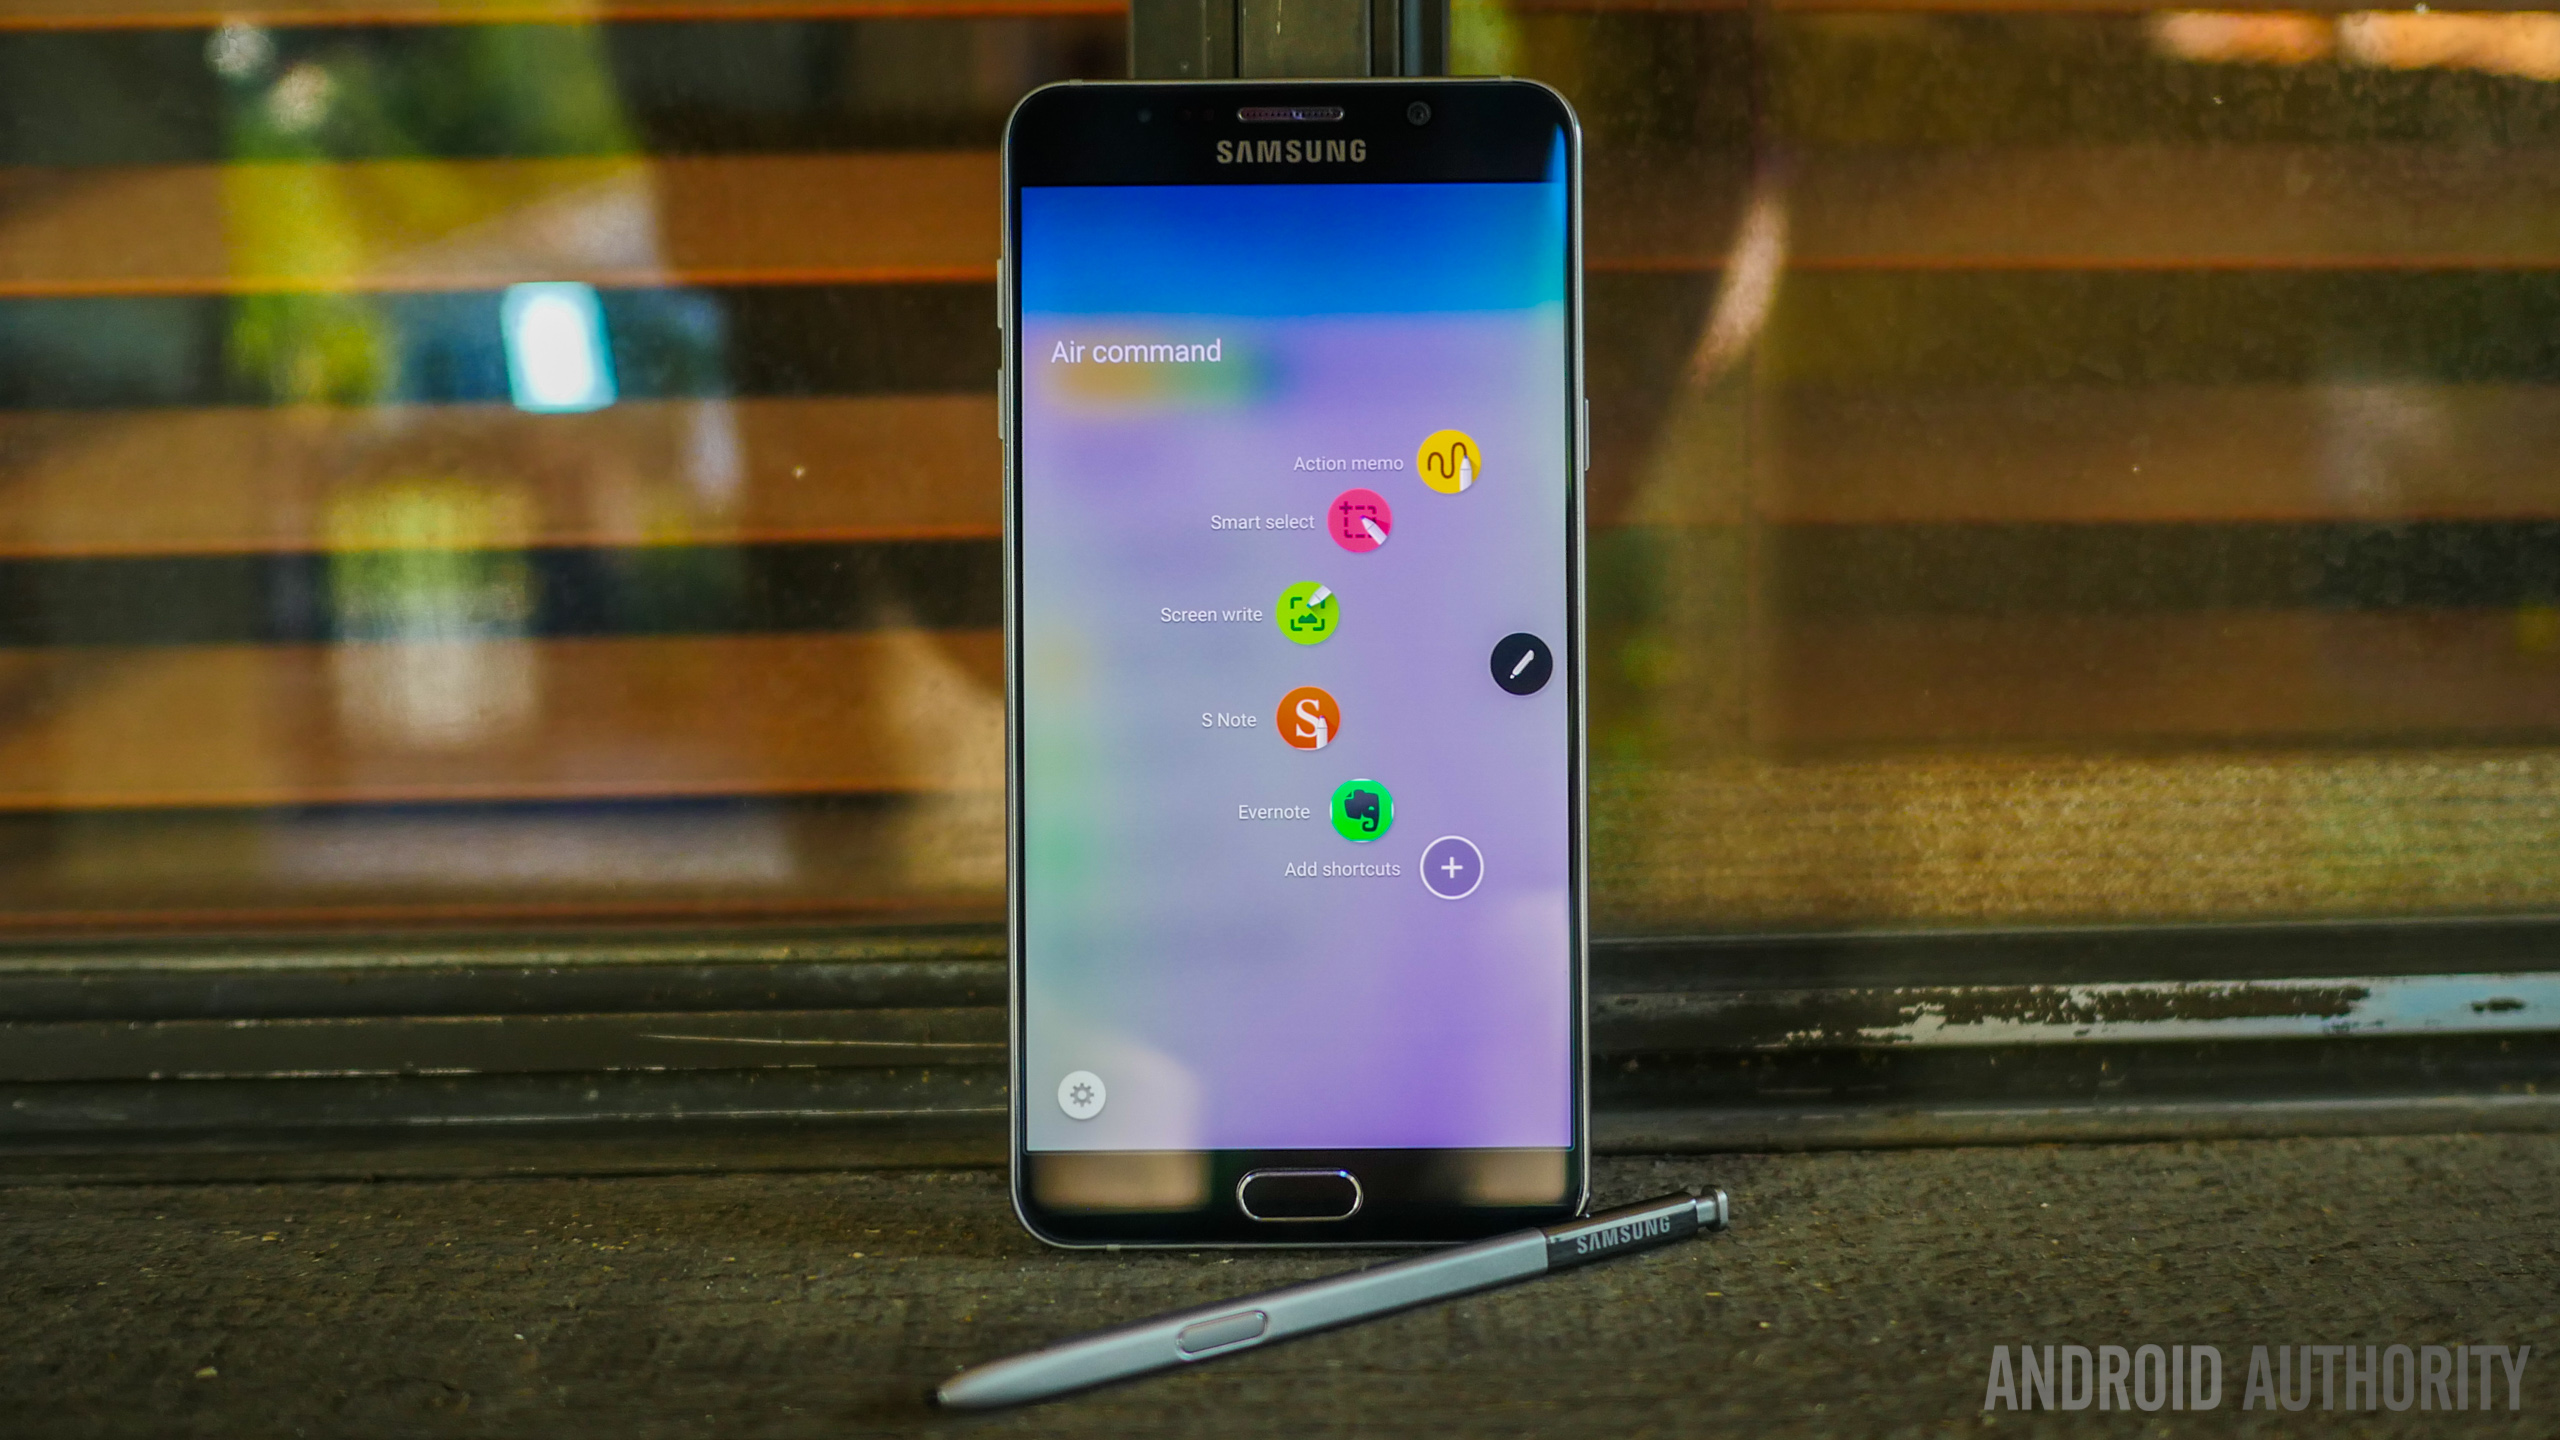 samsung galaxy note 5 review second batch aa (9 of 15)